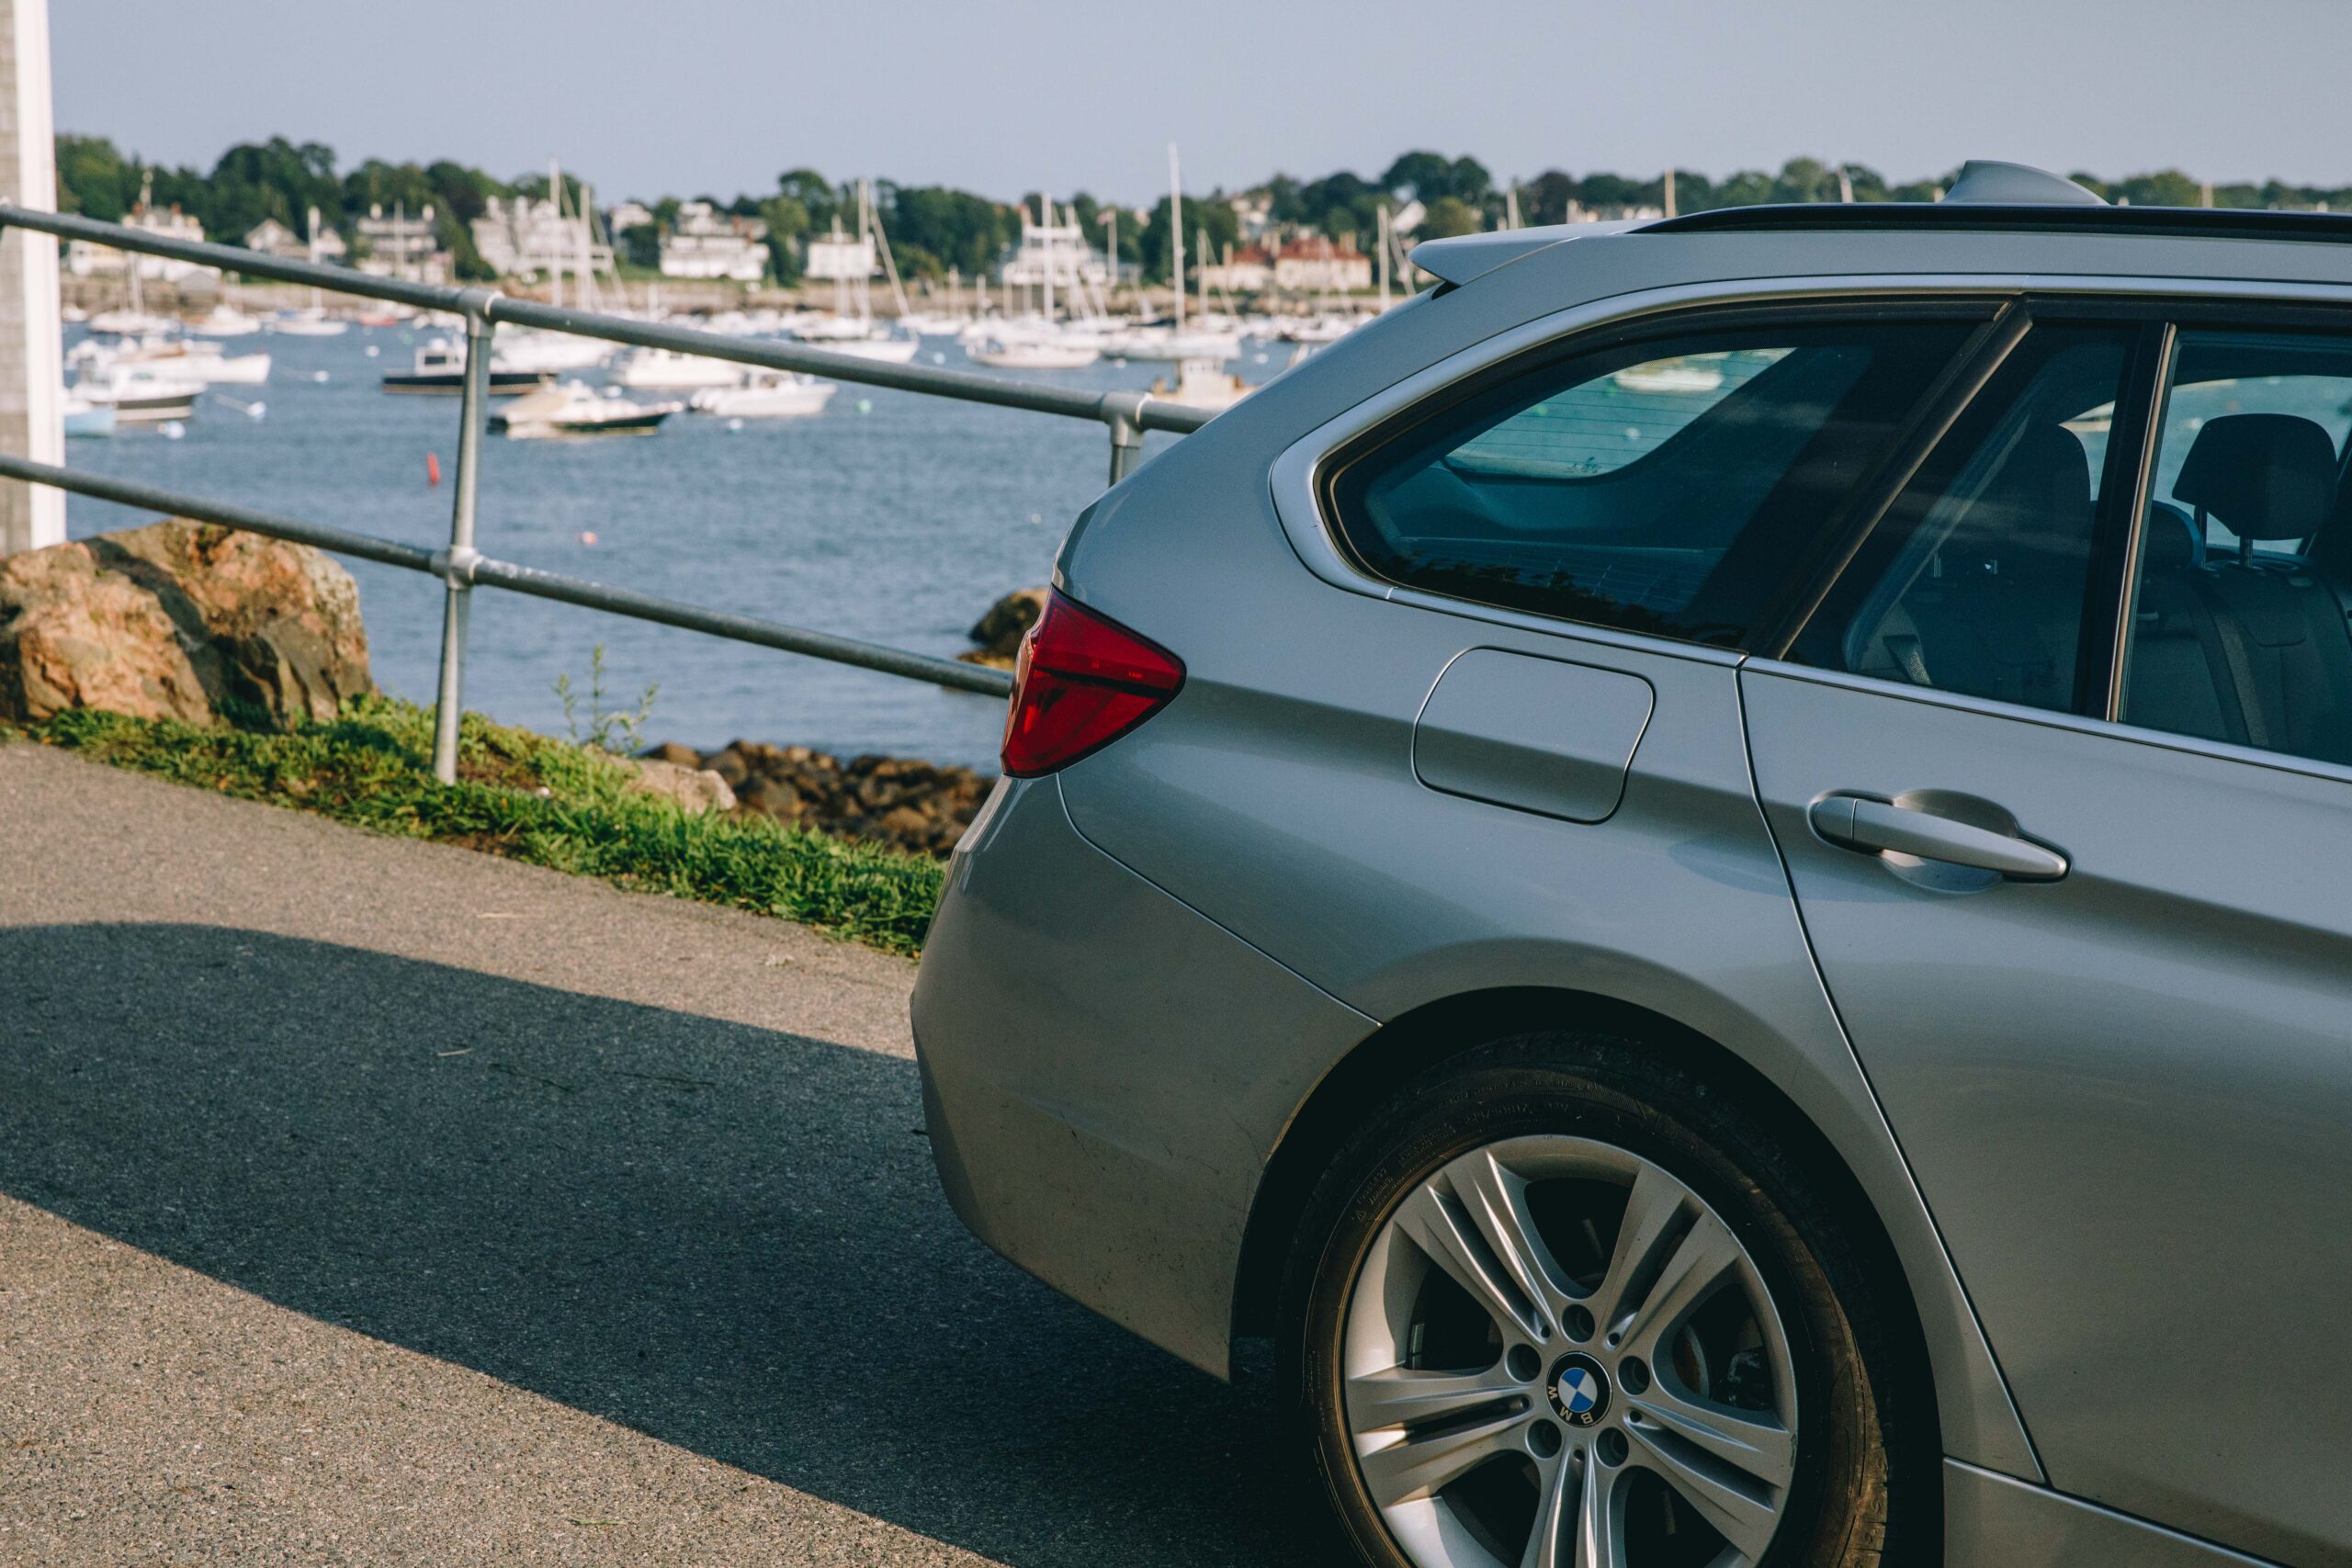 BMW's Last 3 Series Wagon On U.S. Shores Is A Lovely Little Daily -  BimmerLife